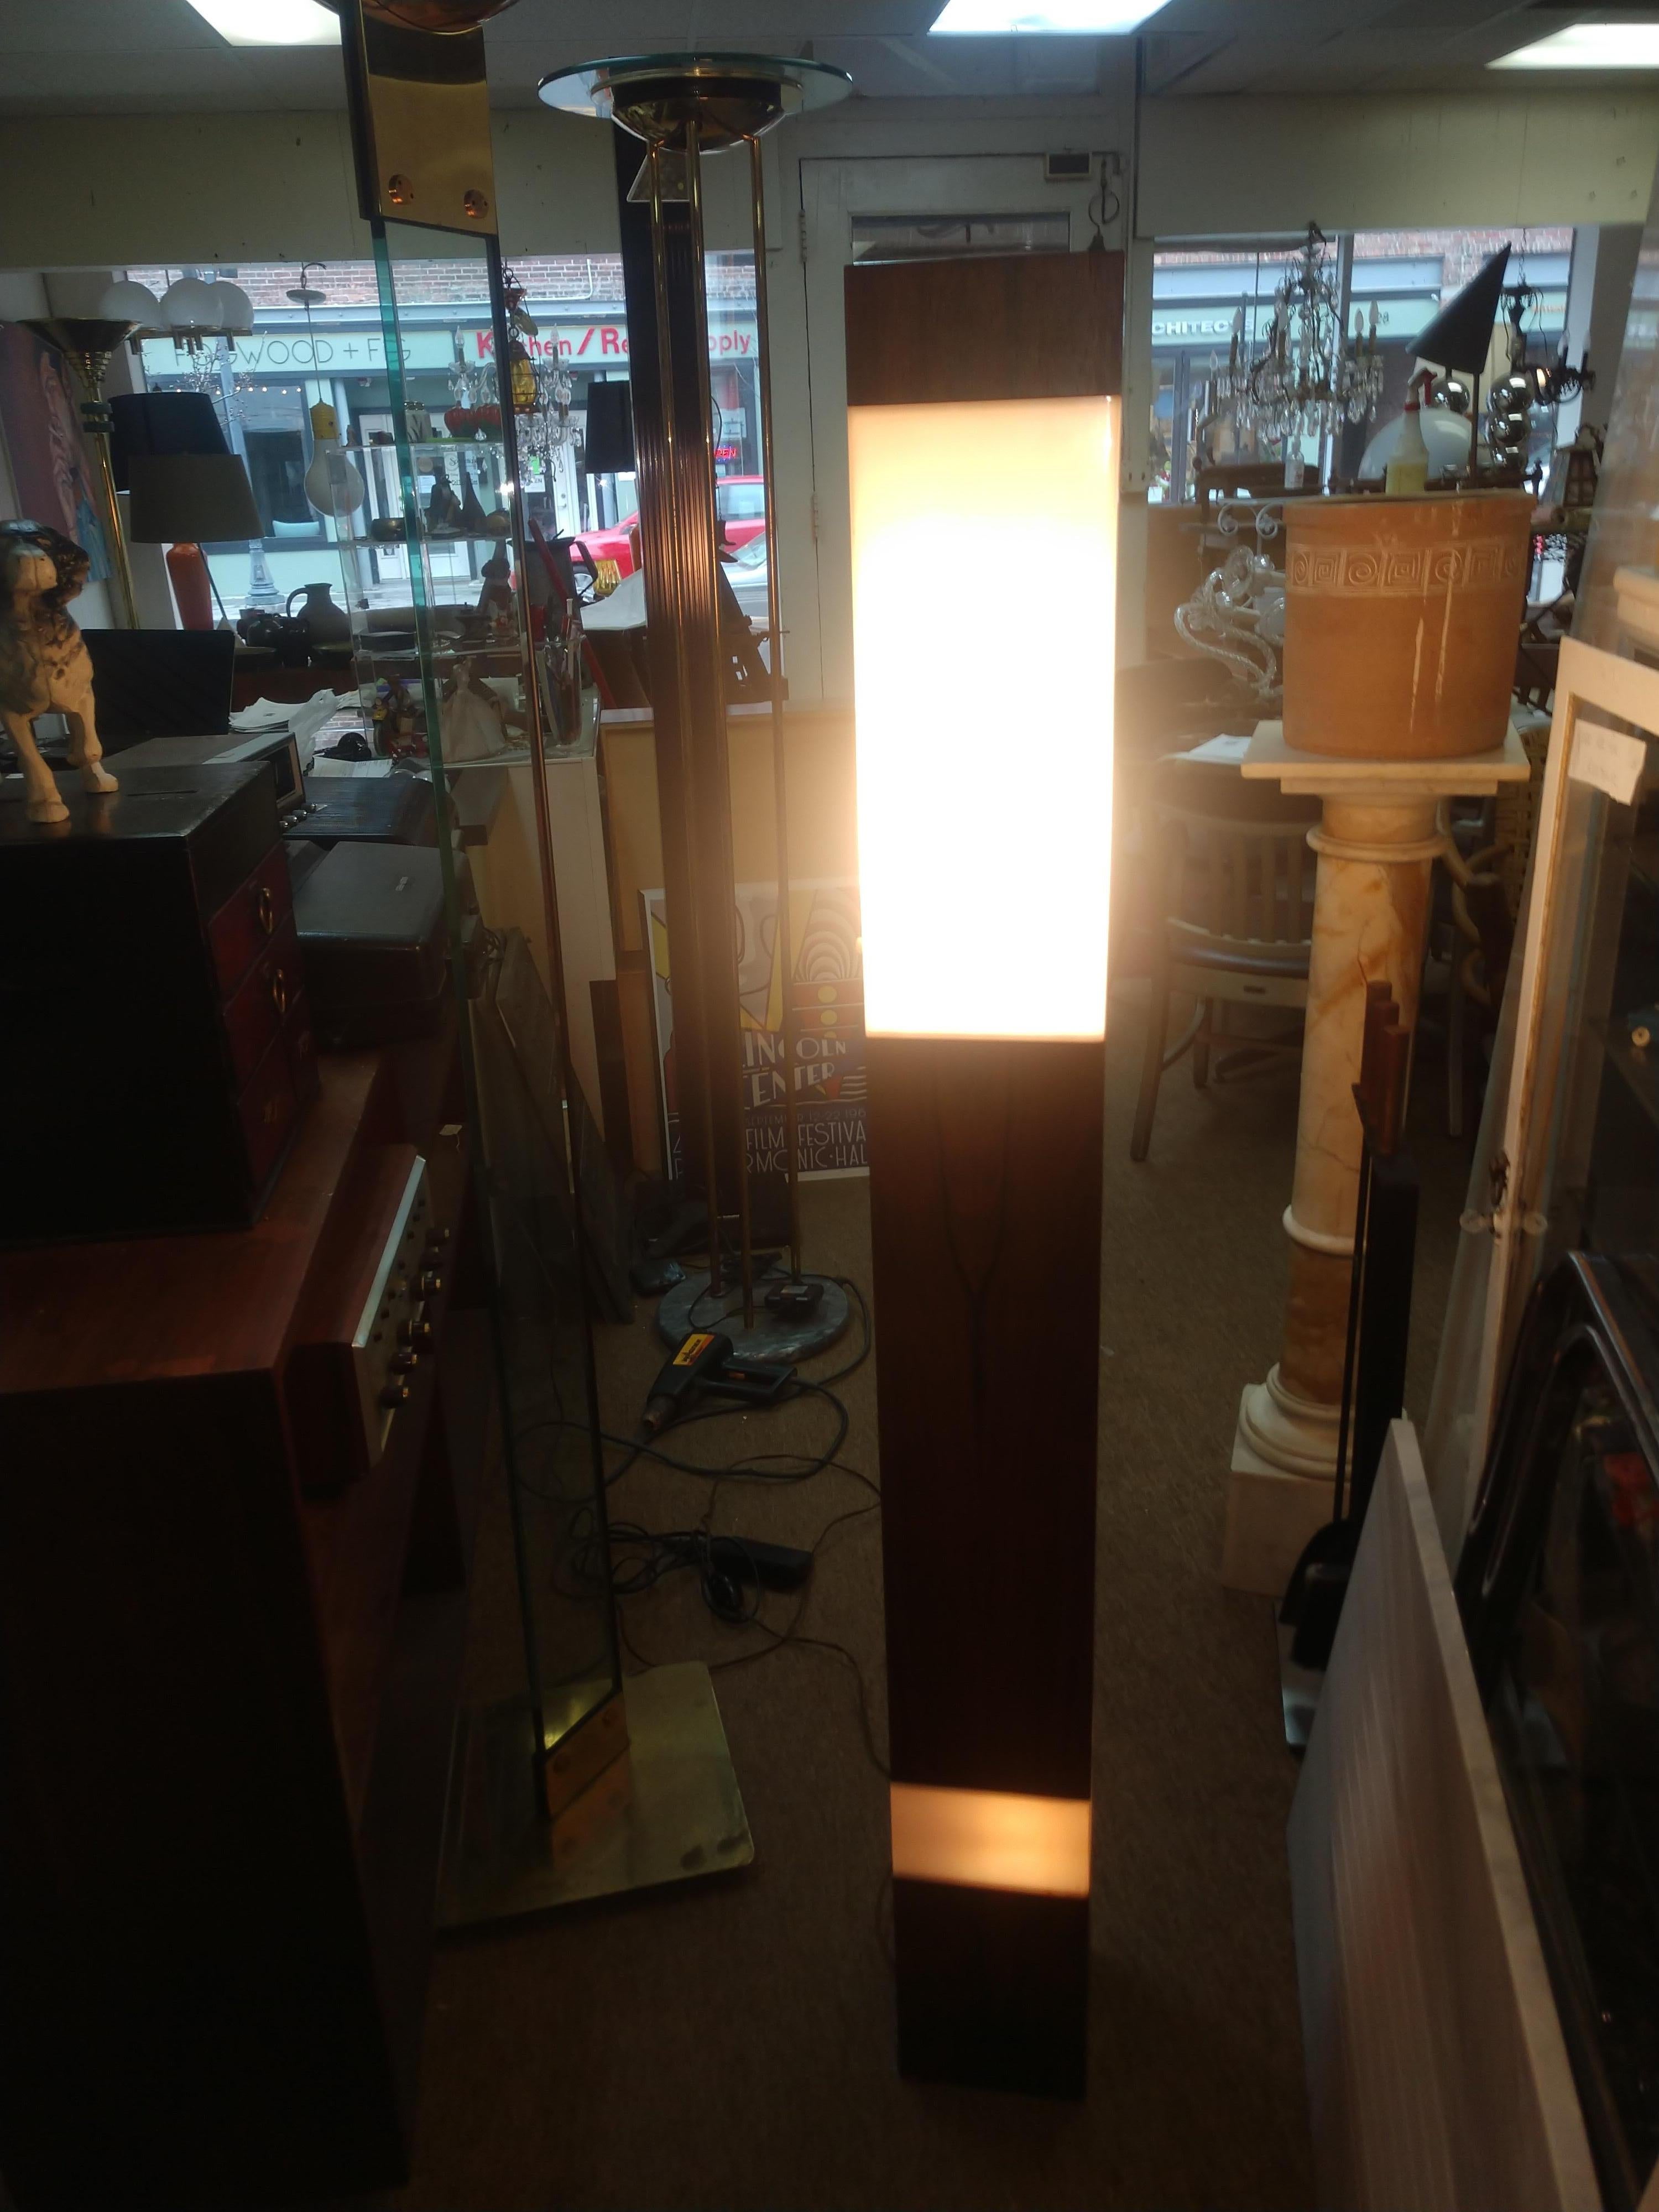 Simple and elegant tall statuesque tower floor lamp in Rosewood and plexiglass. Has two lights, main light is at the top and has a 3way switch while bottom light is more of a mood & novelty light.
In excellent vintage condition with minimal wear.